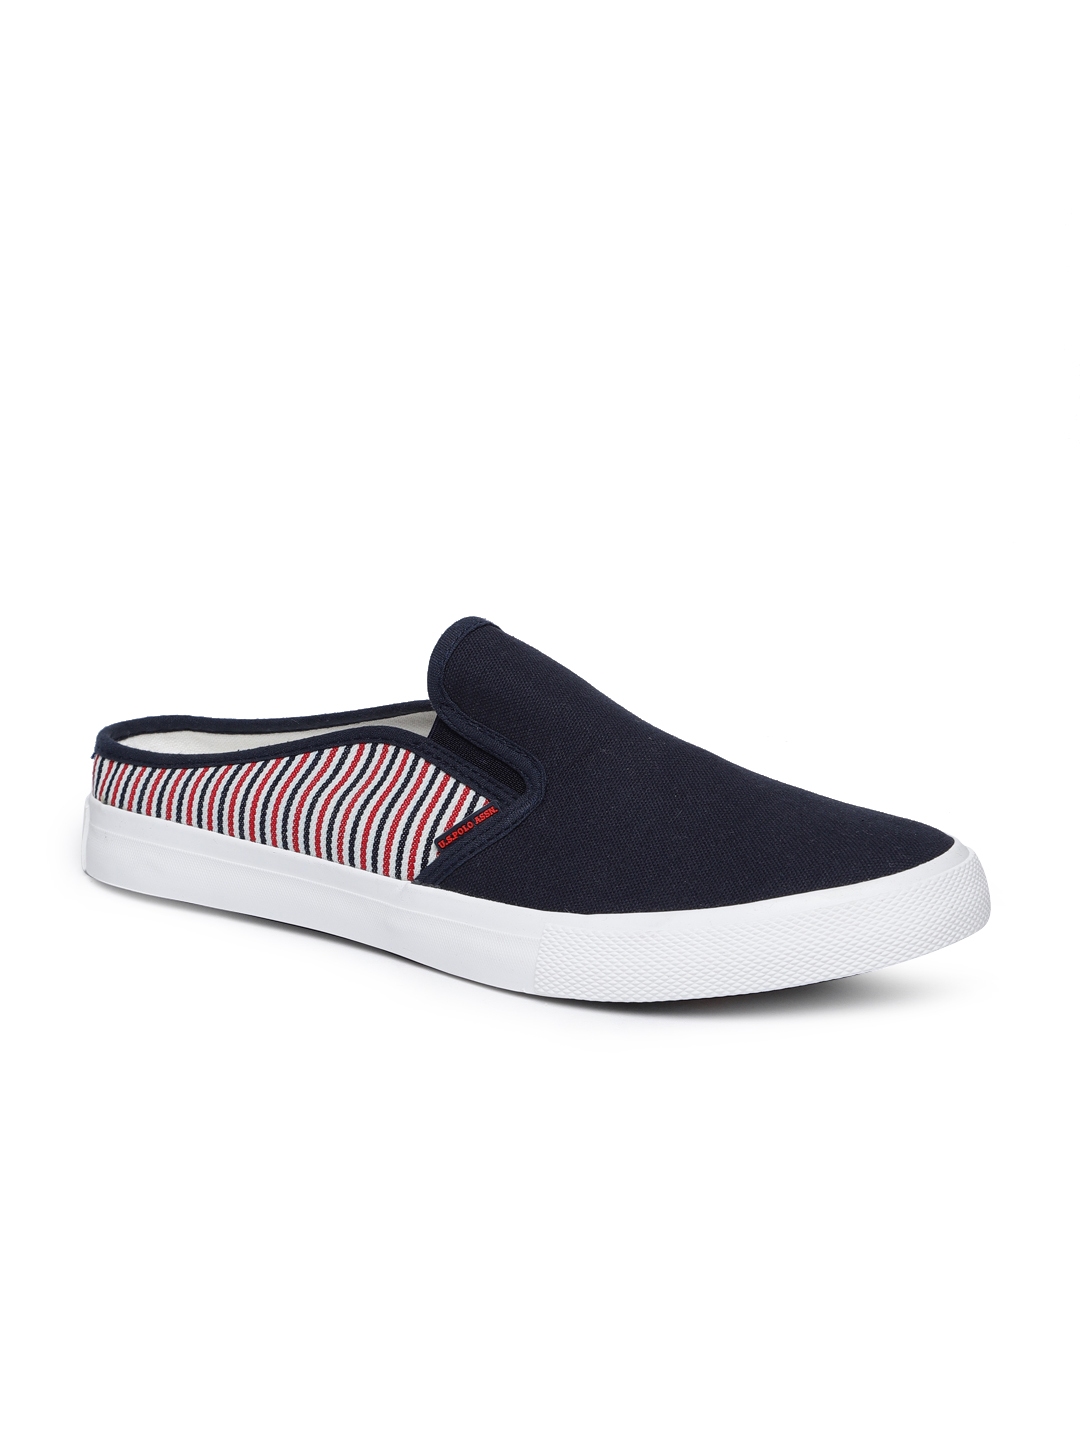 Buy U.S. Polo Assn. Men Navy Blue Slip On Sneakers - Casual Shoes for ...